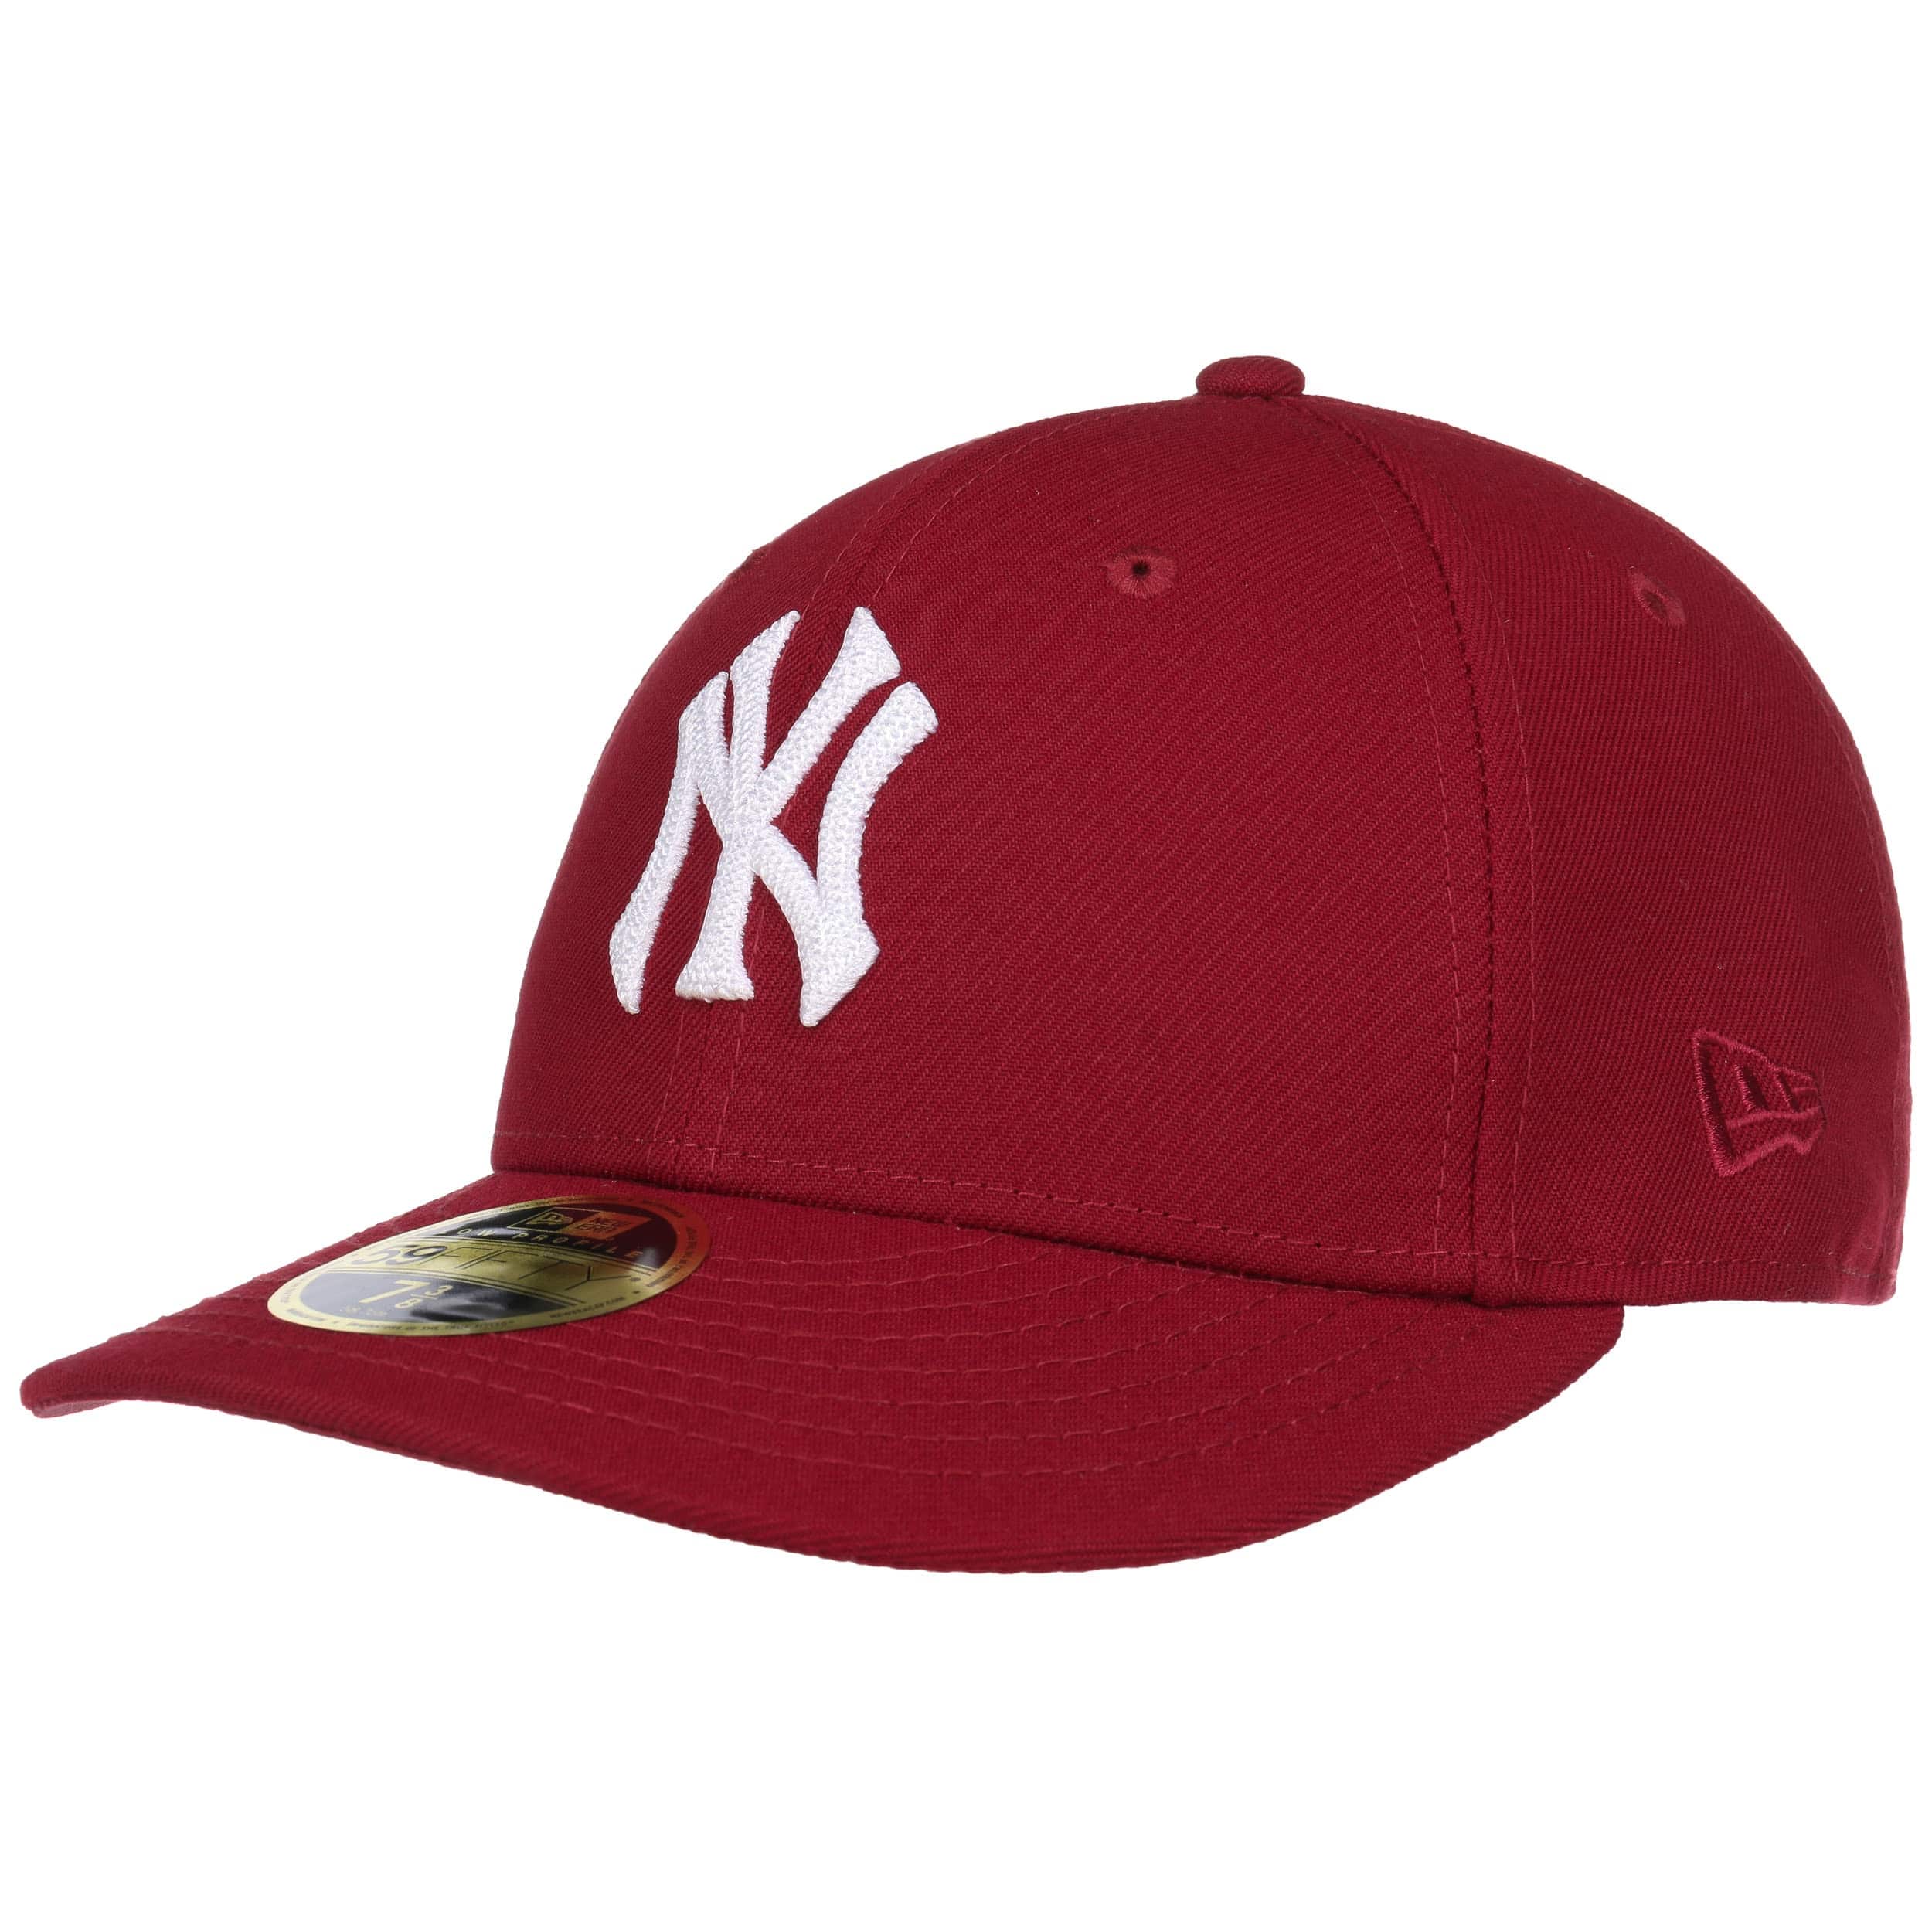 59Fifty Low Profile Yankees Cap by New Era